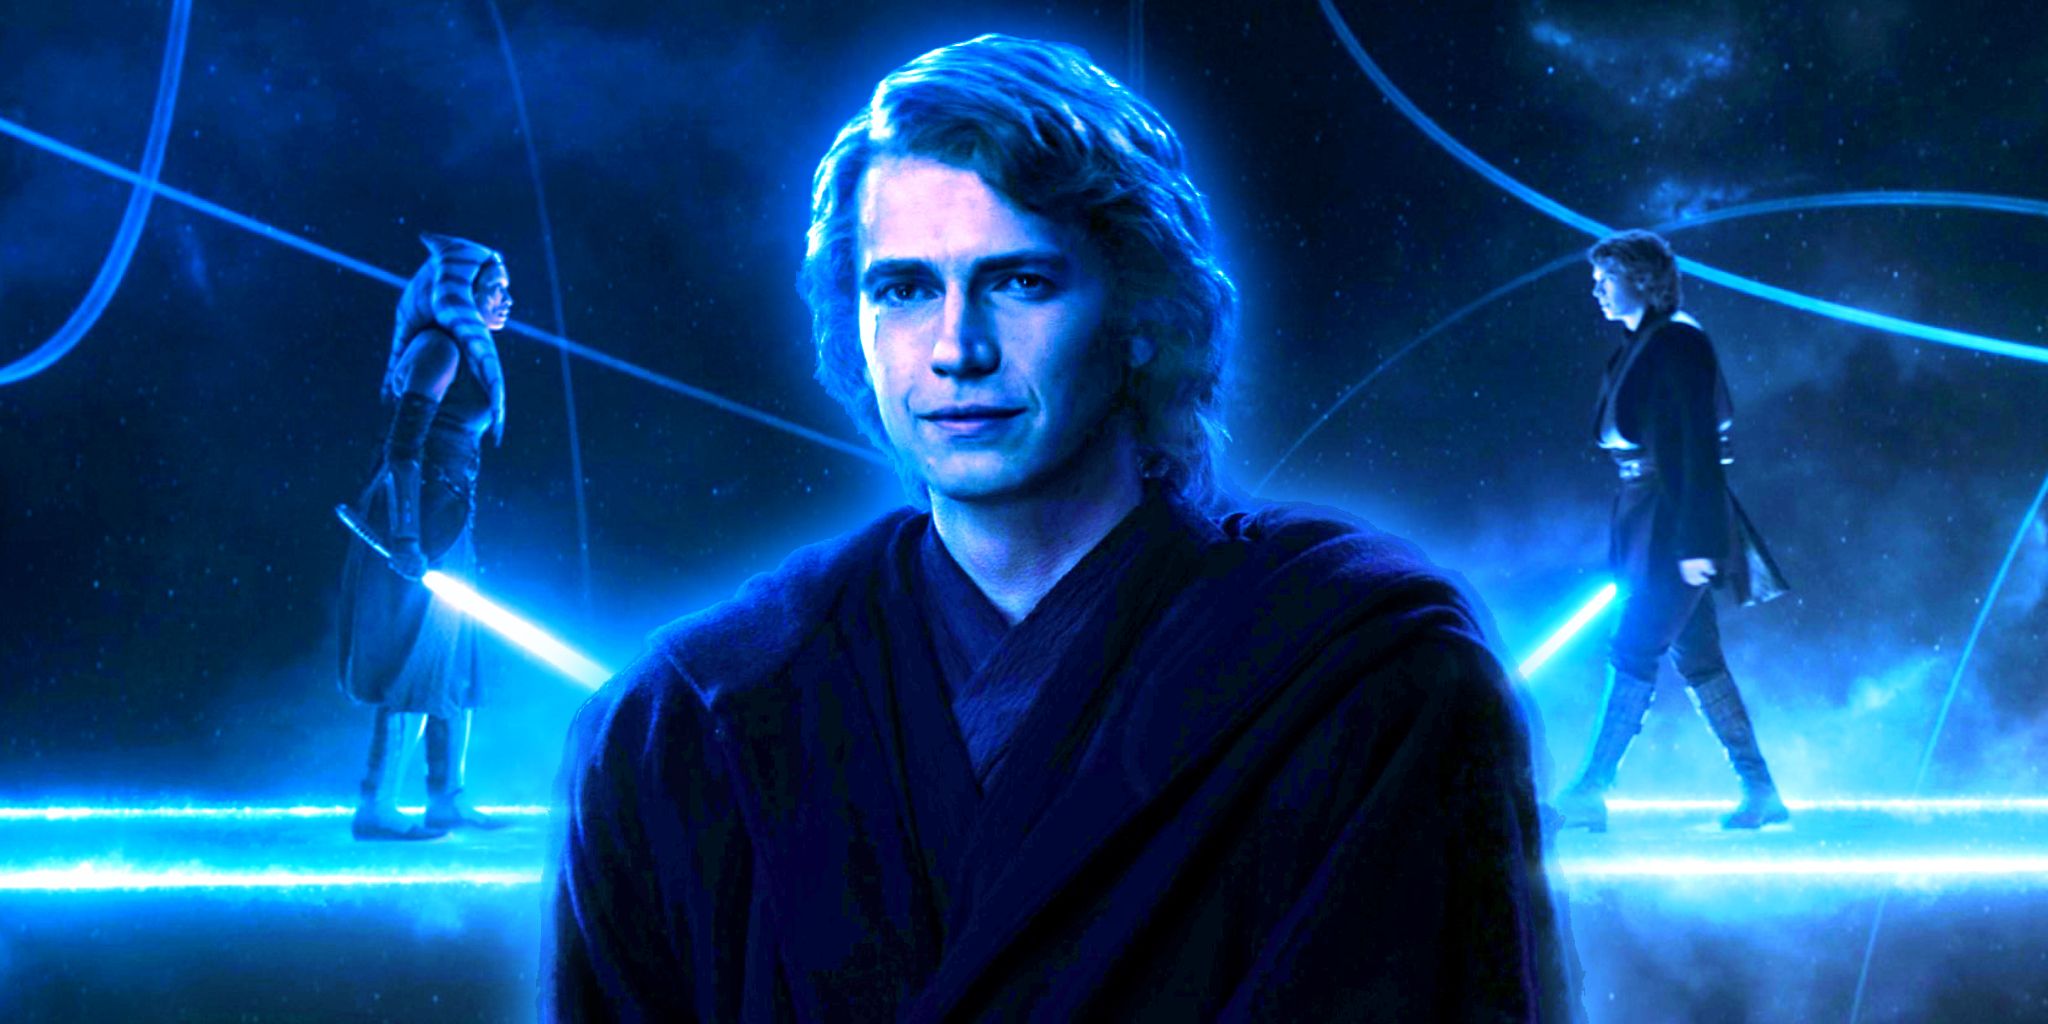 Anakin's Force ghost in the foreground, with the World Between Worlds in the background